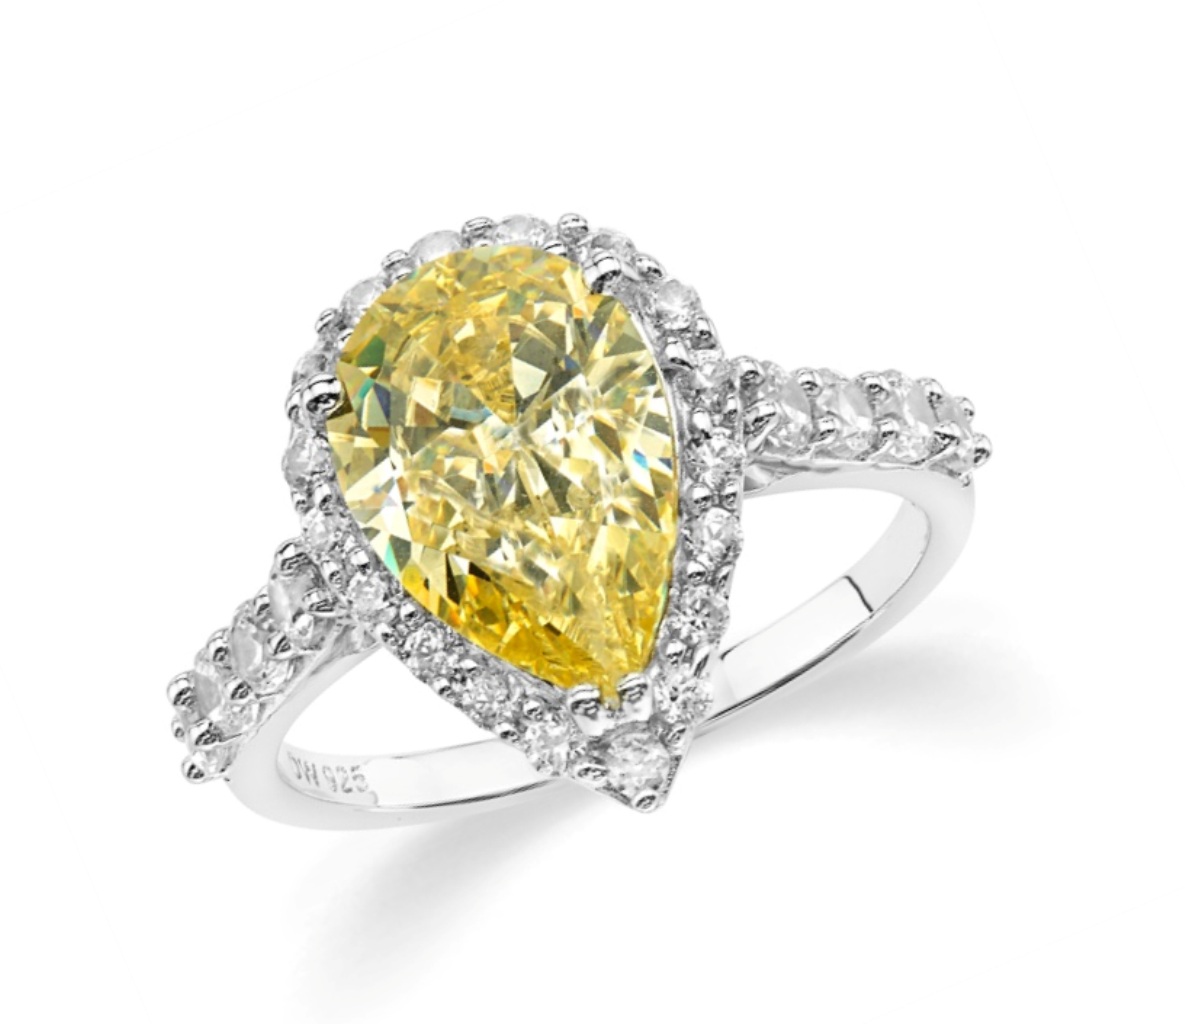 Sunshine Yellow CZ and White CZ Teardrop Ring, Rhodium Plated Sterling Silver